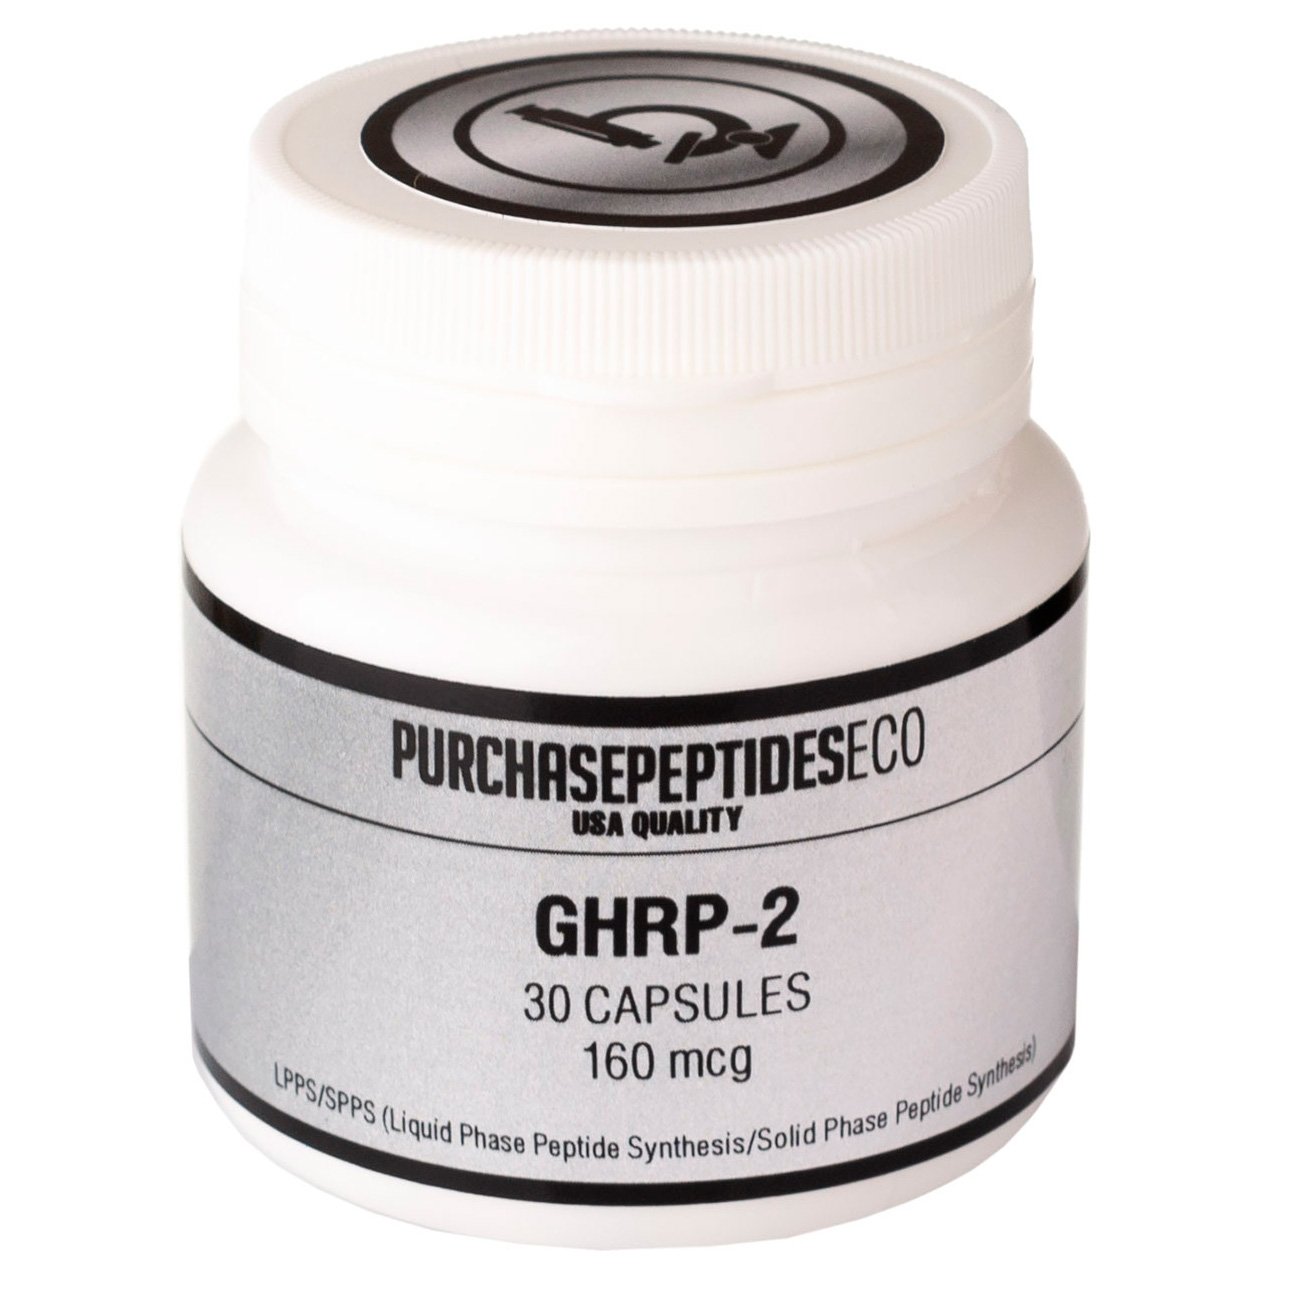 GHRP-2 капсулы,  ml, PurchasepeptidesEco. Peptides. 